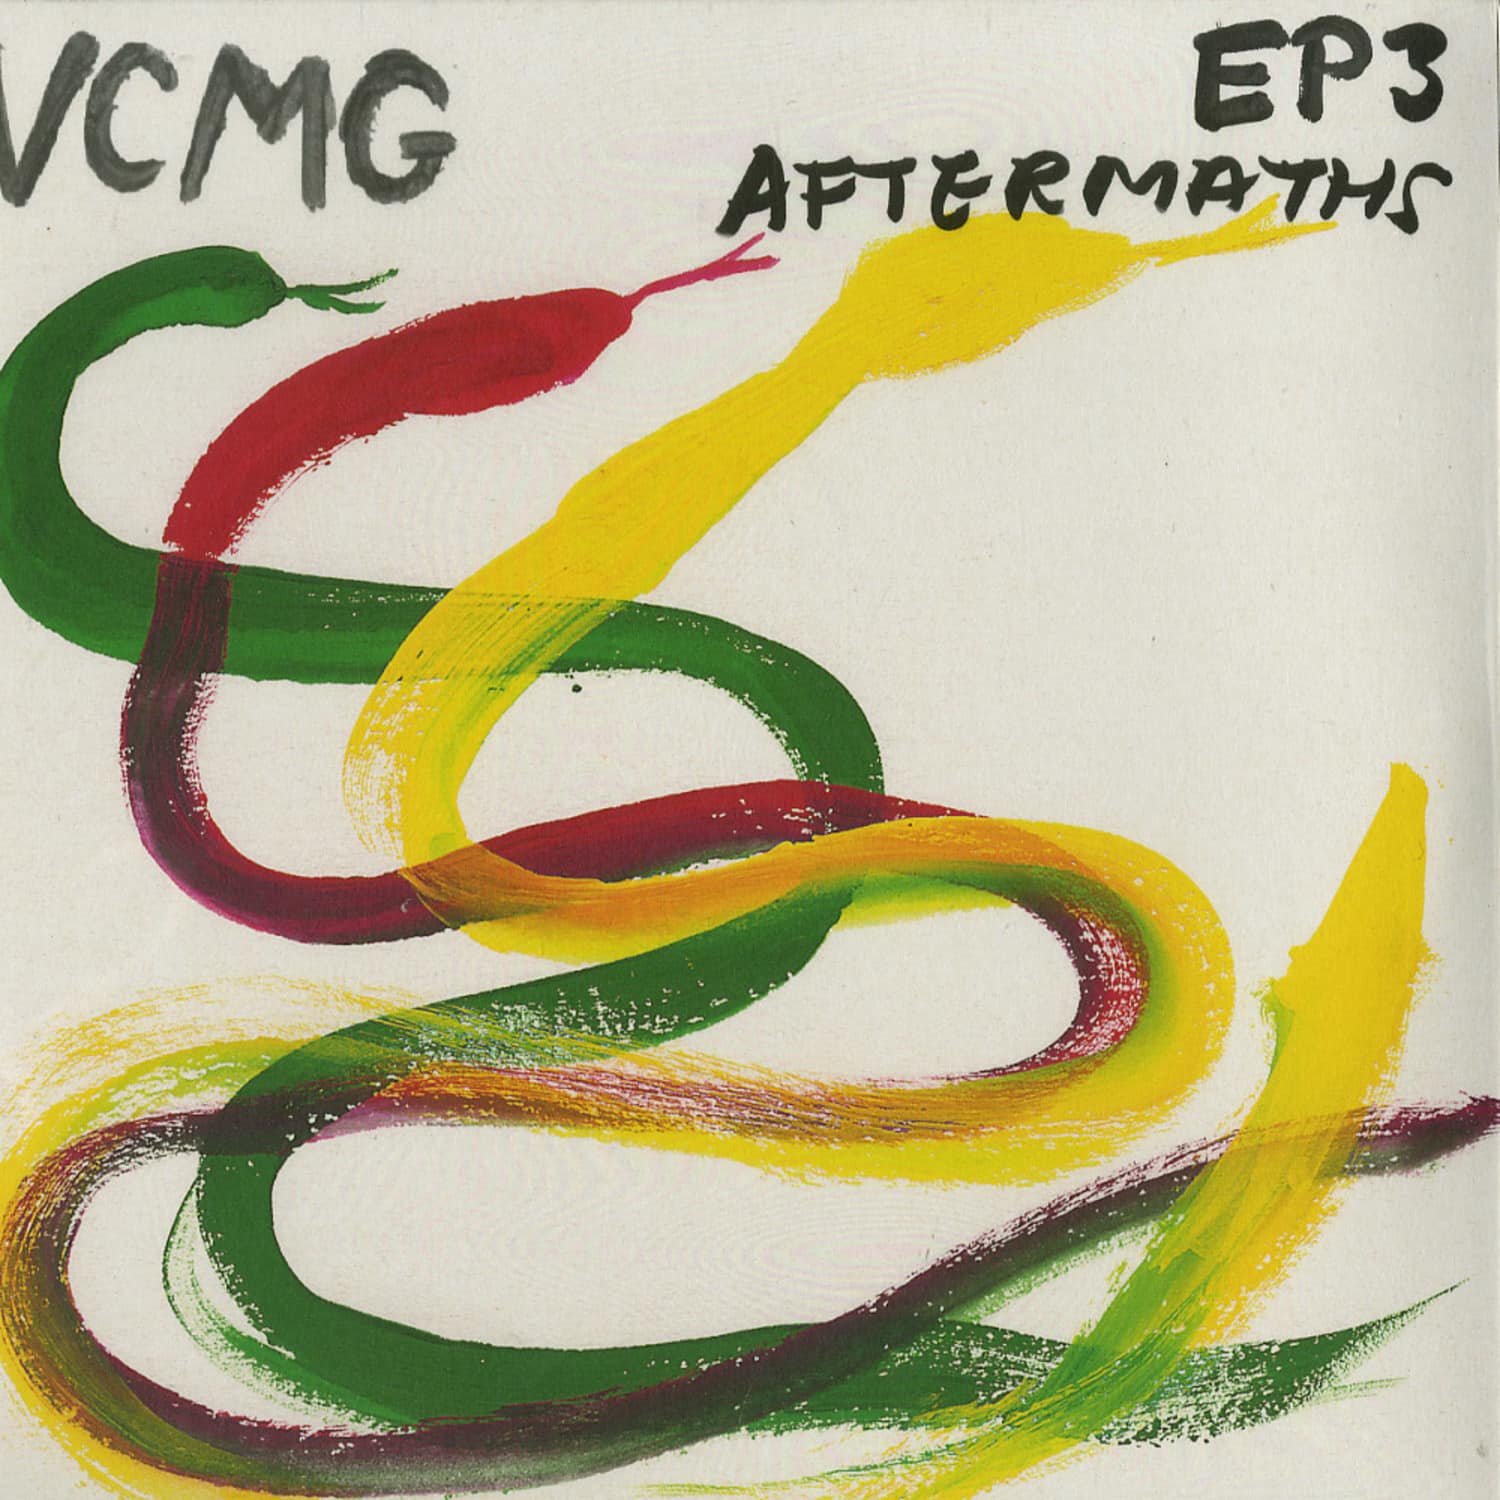 VCMG - EP3 / AFTERMATH